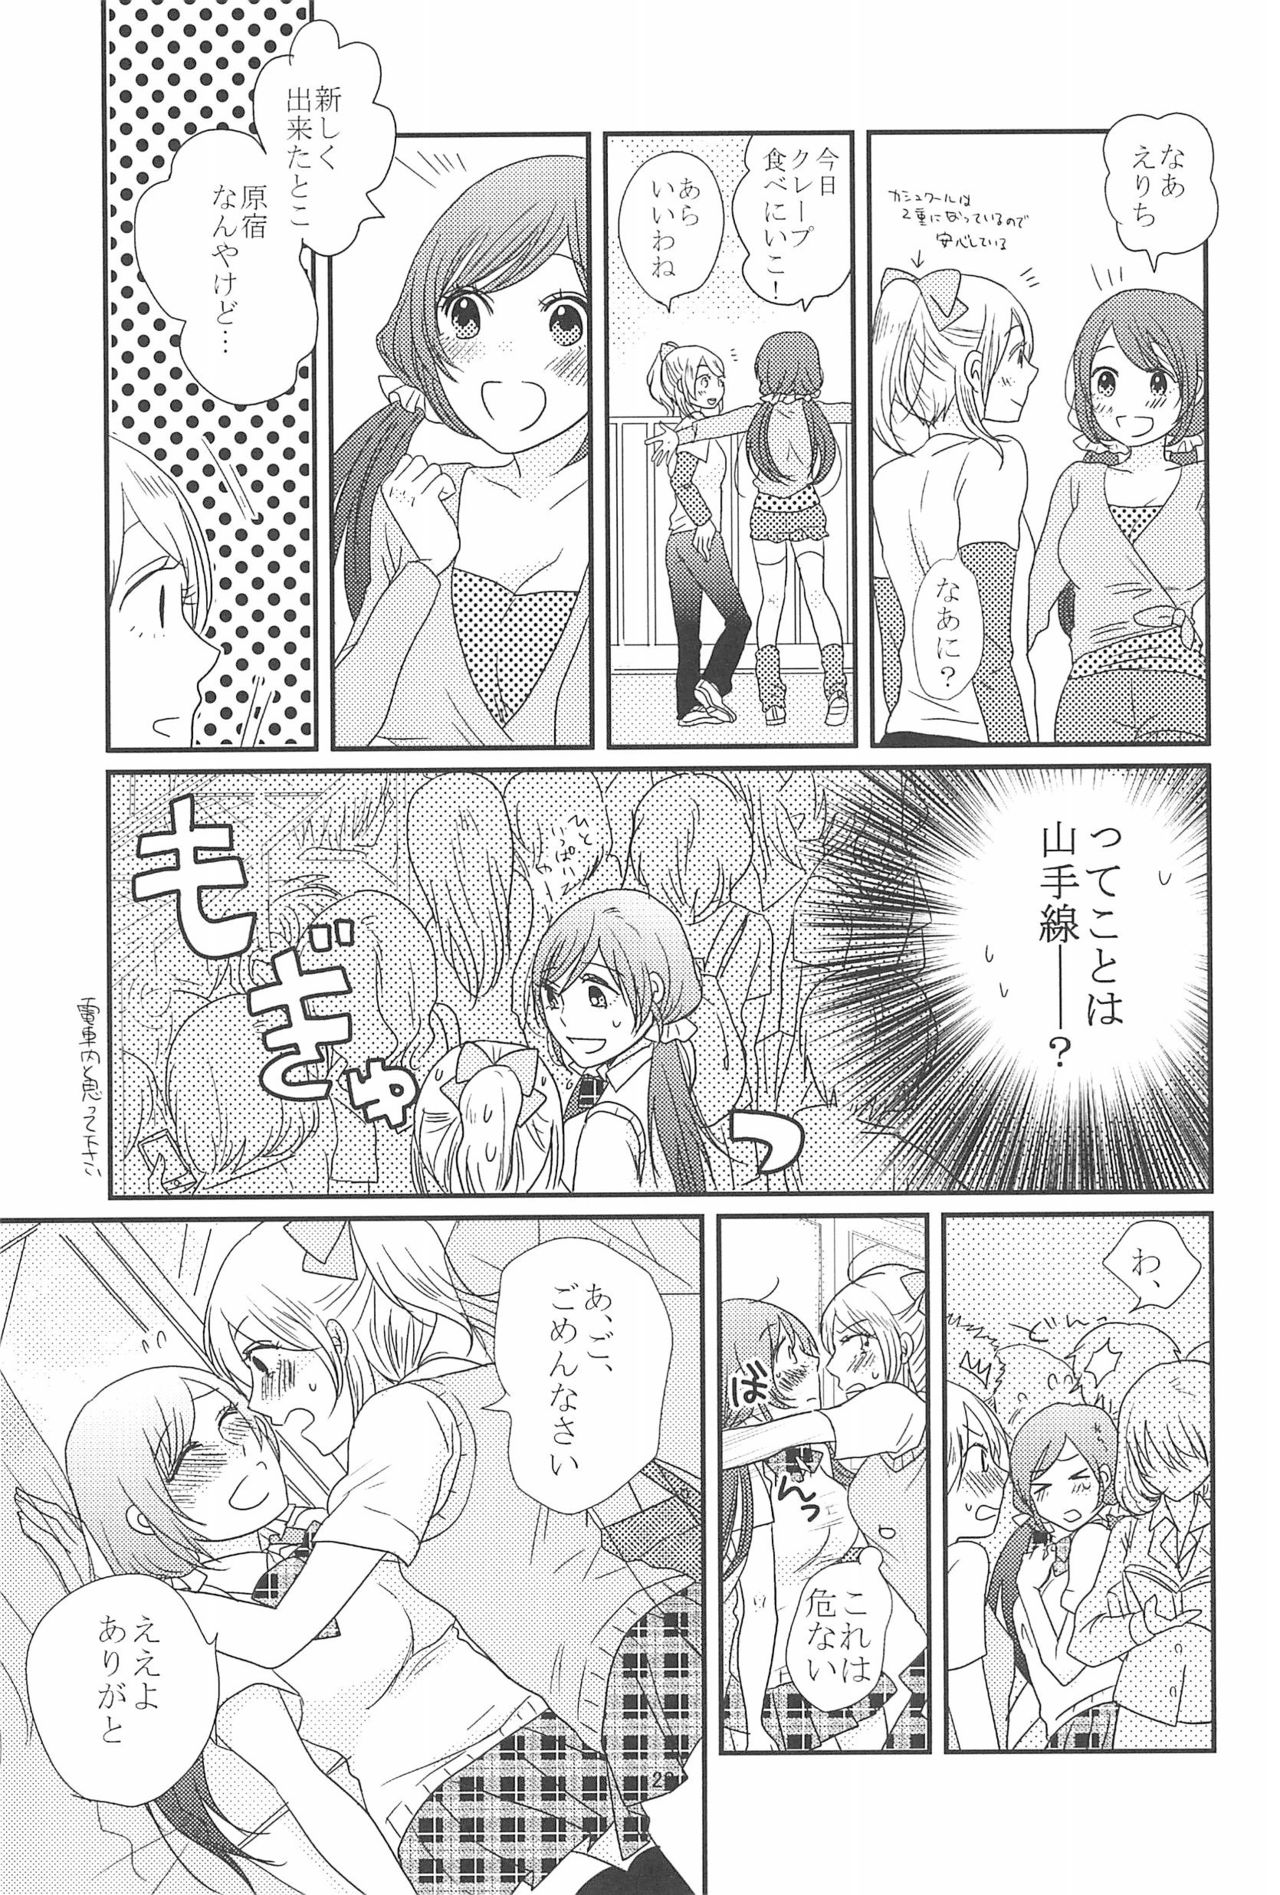 (C90) [BK*N2 (Mikawa Miso)] HAPPY GO LUCKY DAYS (Love Live!) page 27 full